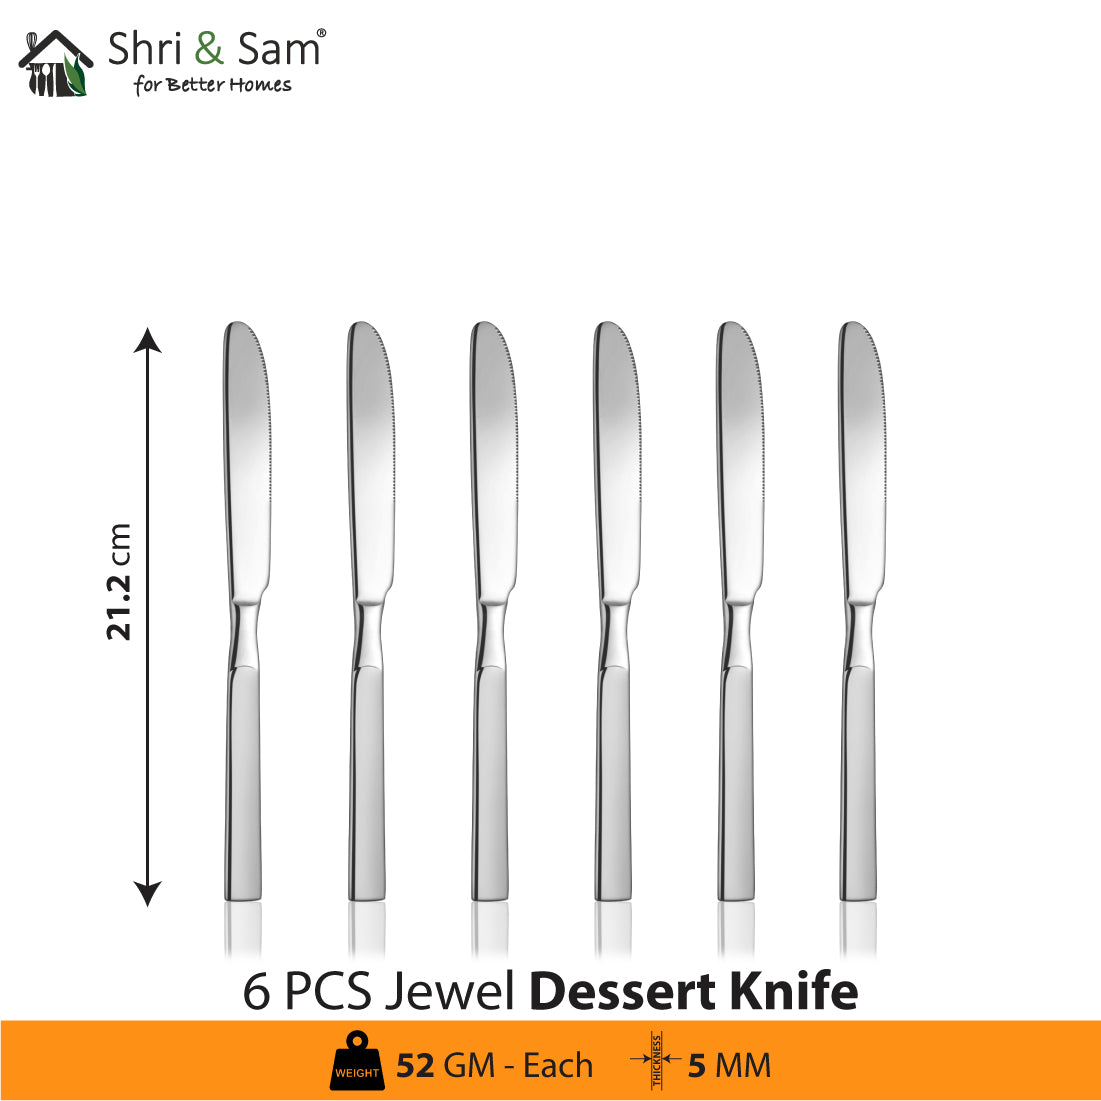 Stainless Steel 24 PCS Cutlery Set (6 Pcs Tea Spoon, 6 Pcs Dessert Spoon, 6 Pcs Dessert Fork and 6 Pcs Dessert Knife) with Leather Box Jewel